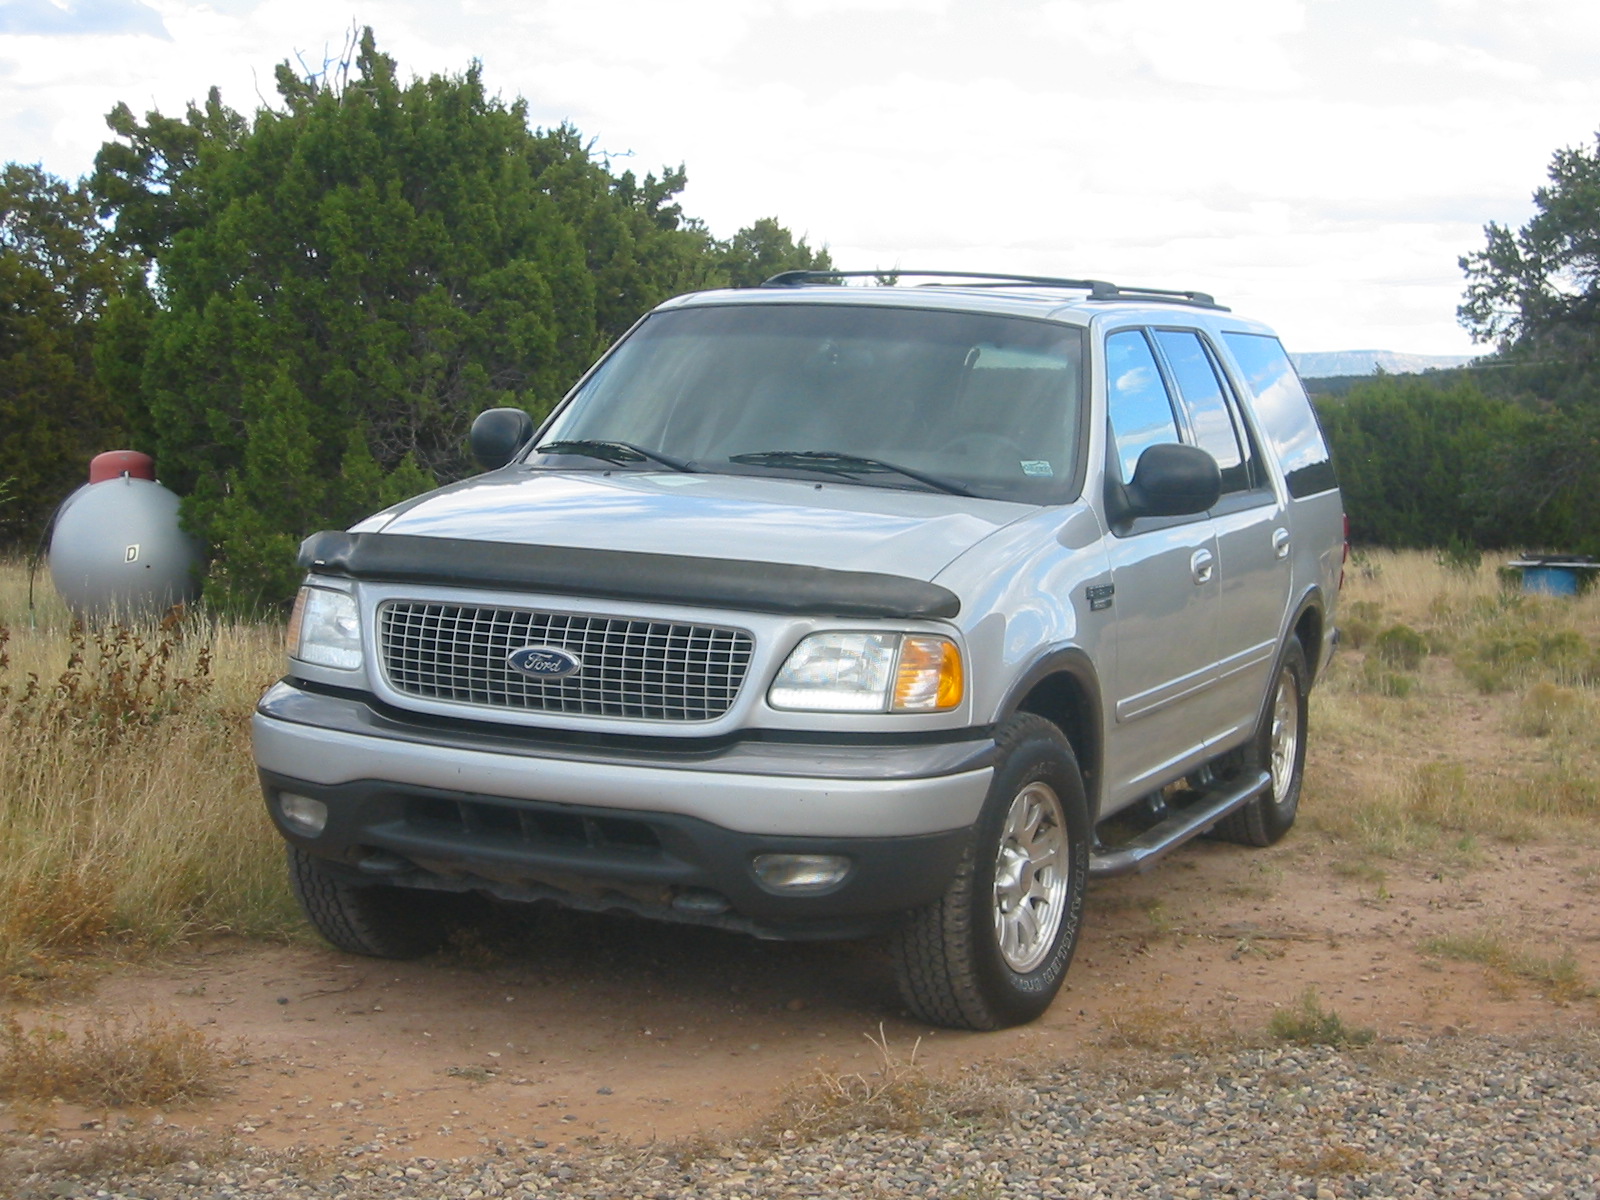 Silver_Ford_Expedition_fl.jpg